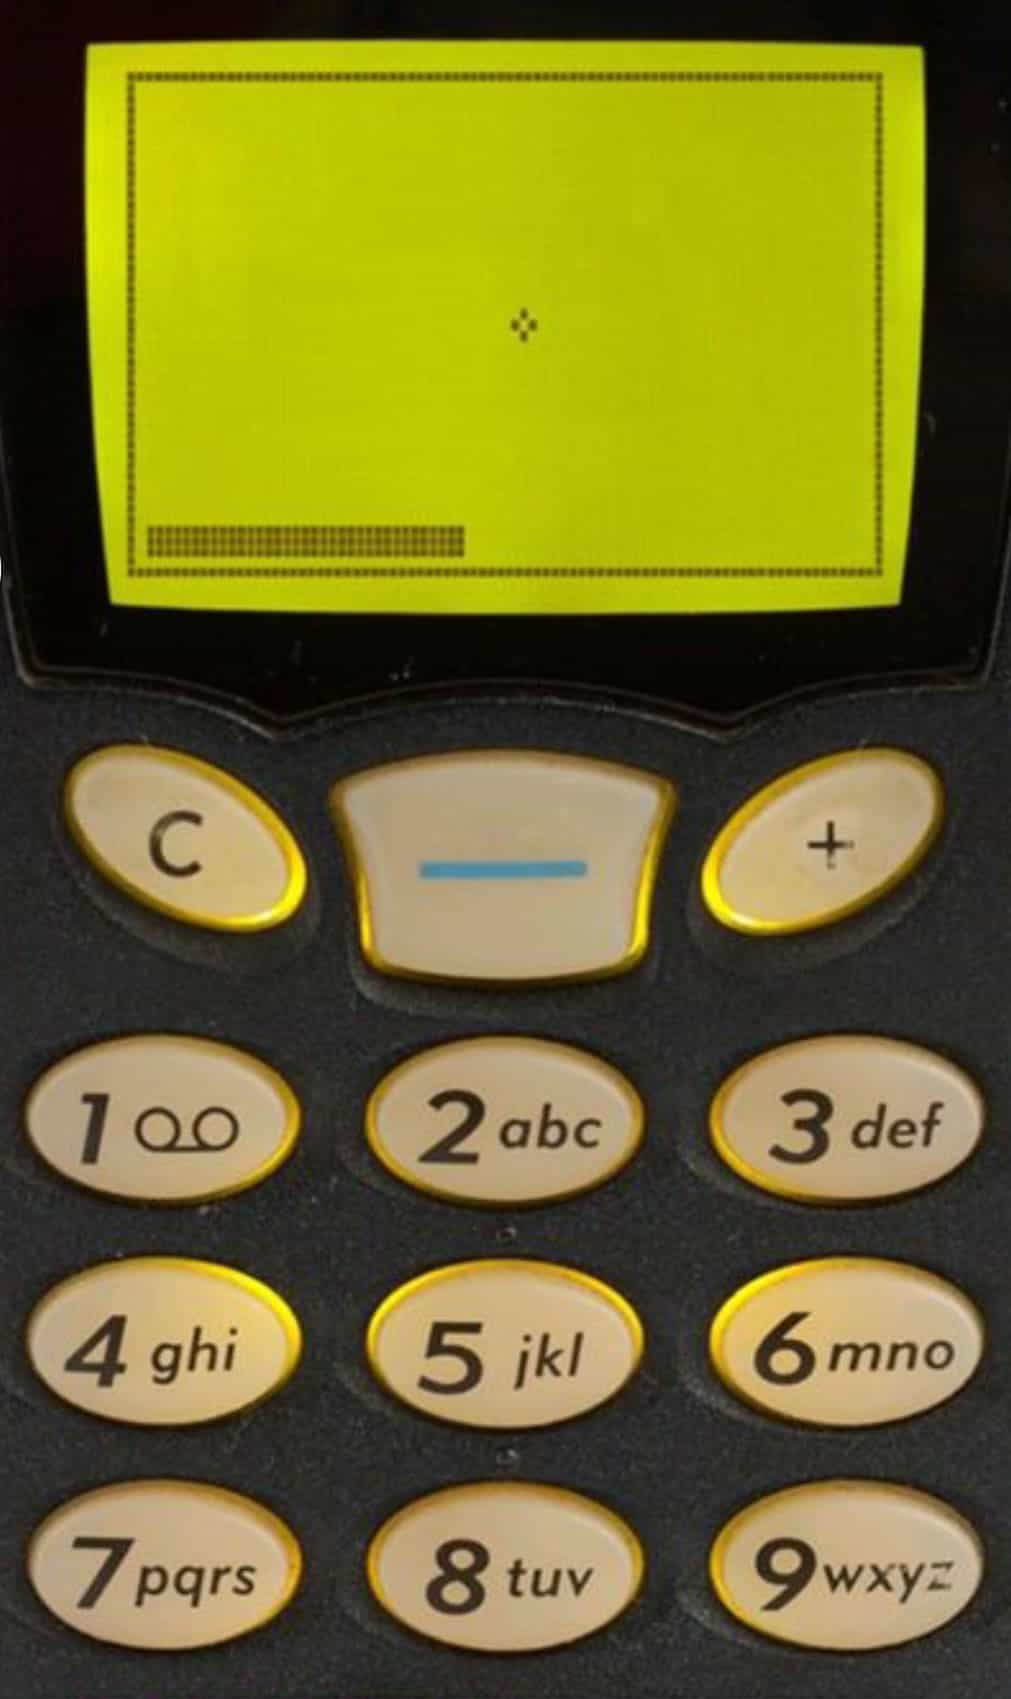 A photo of the game “Snake” on a monochromatic cell phone screen.